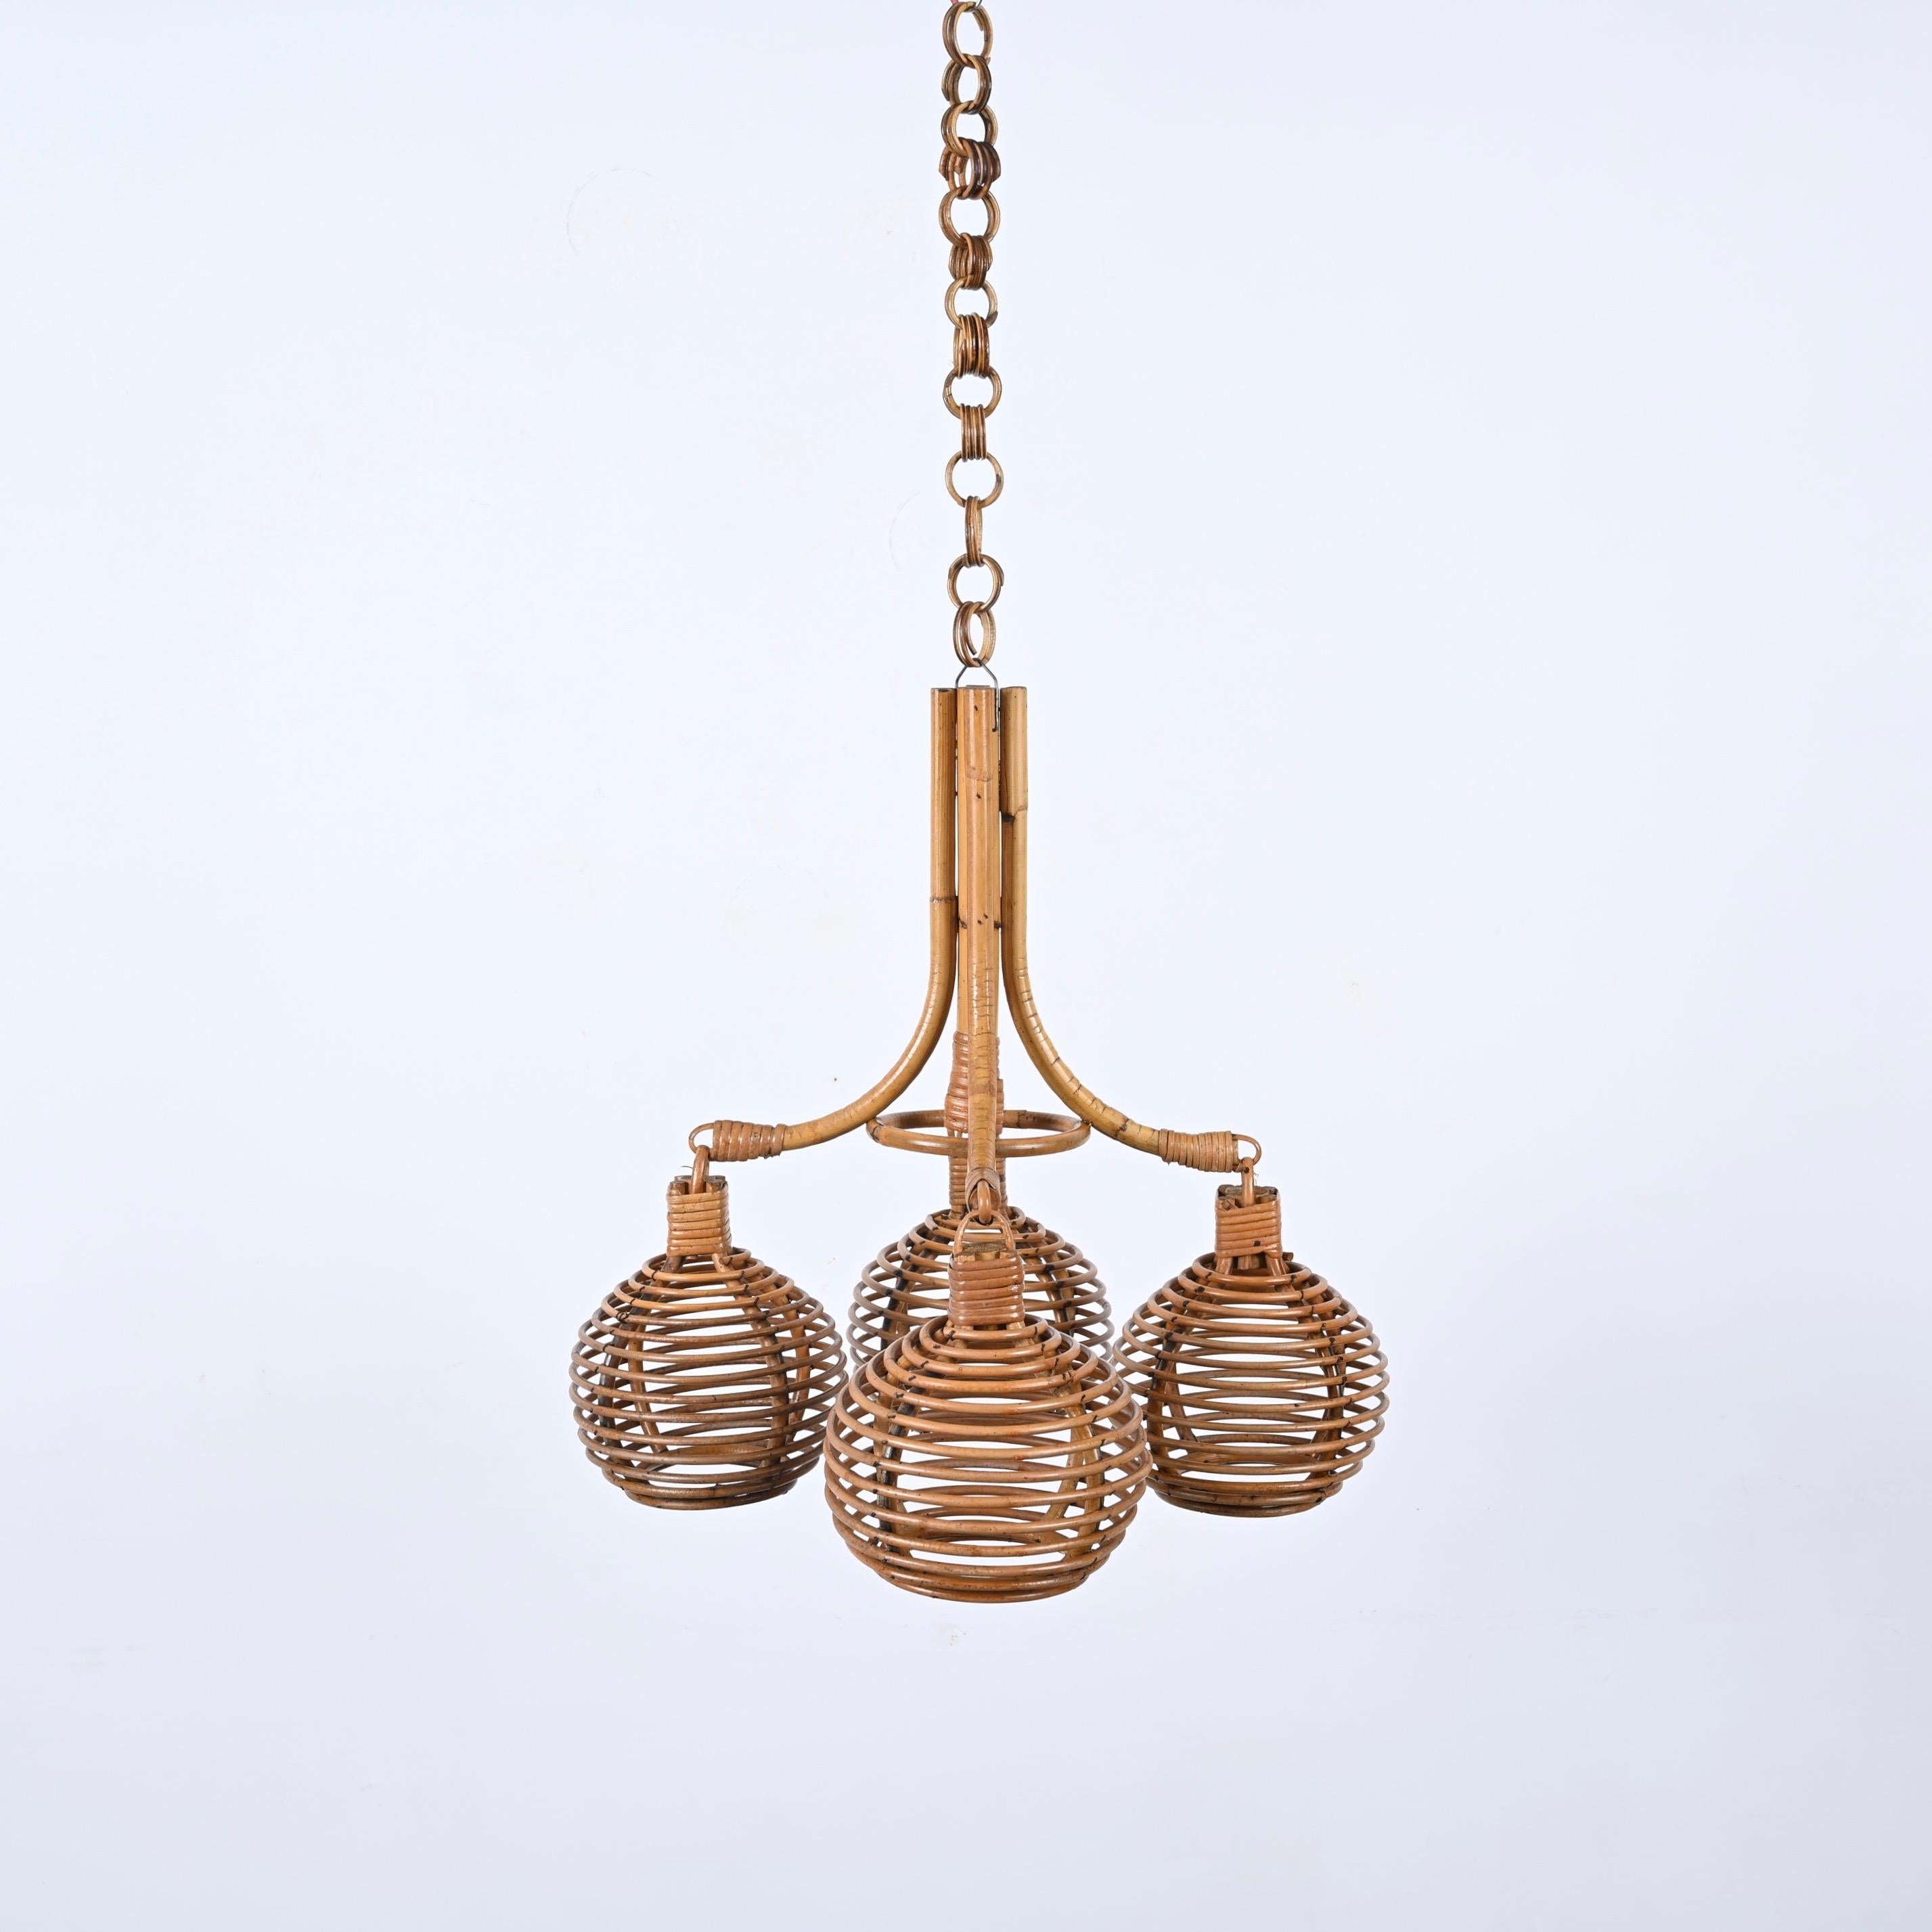 Midcentury French Riviera Bambo and Rattan 4 Sphere Italian Chandelier, 1960s 8